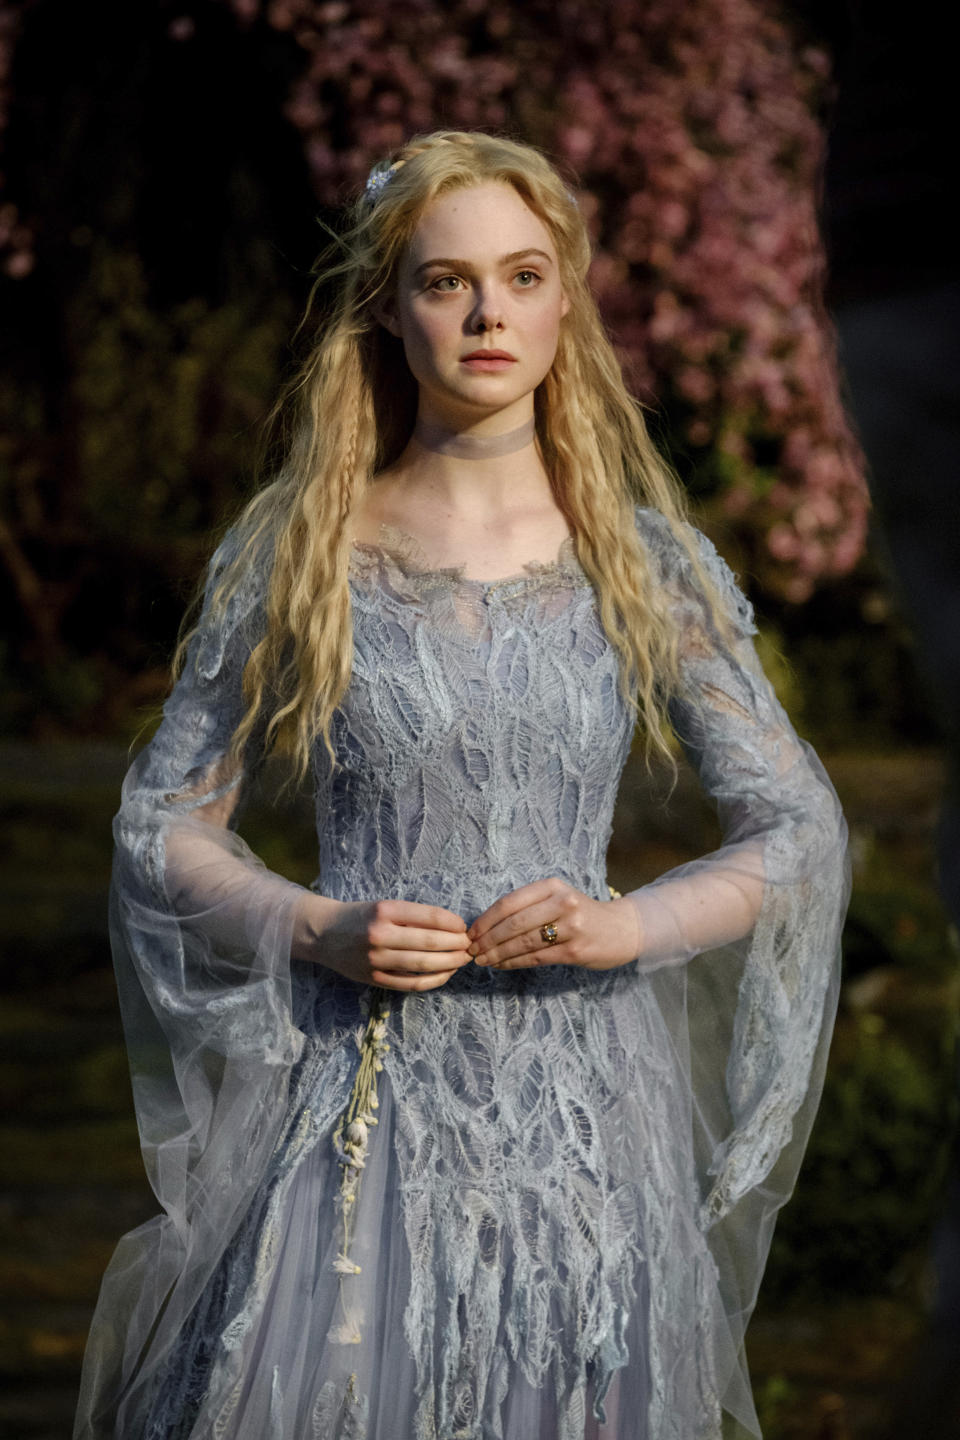 This image released by Disney shows Elle Fanning as Aurora in a scene from "Maleficent: Mistress of Evil." (Jaap Buitendijk/Disney via AP)